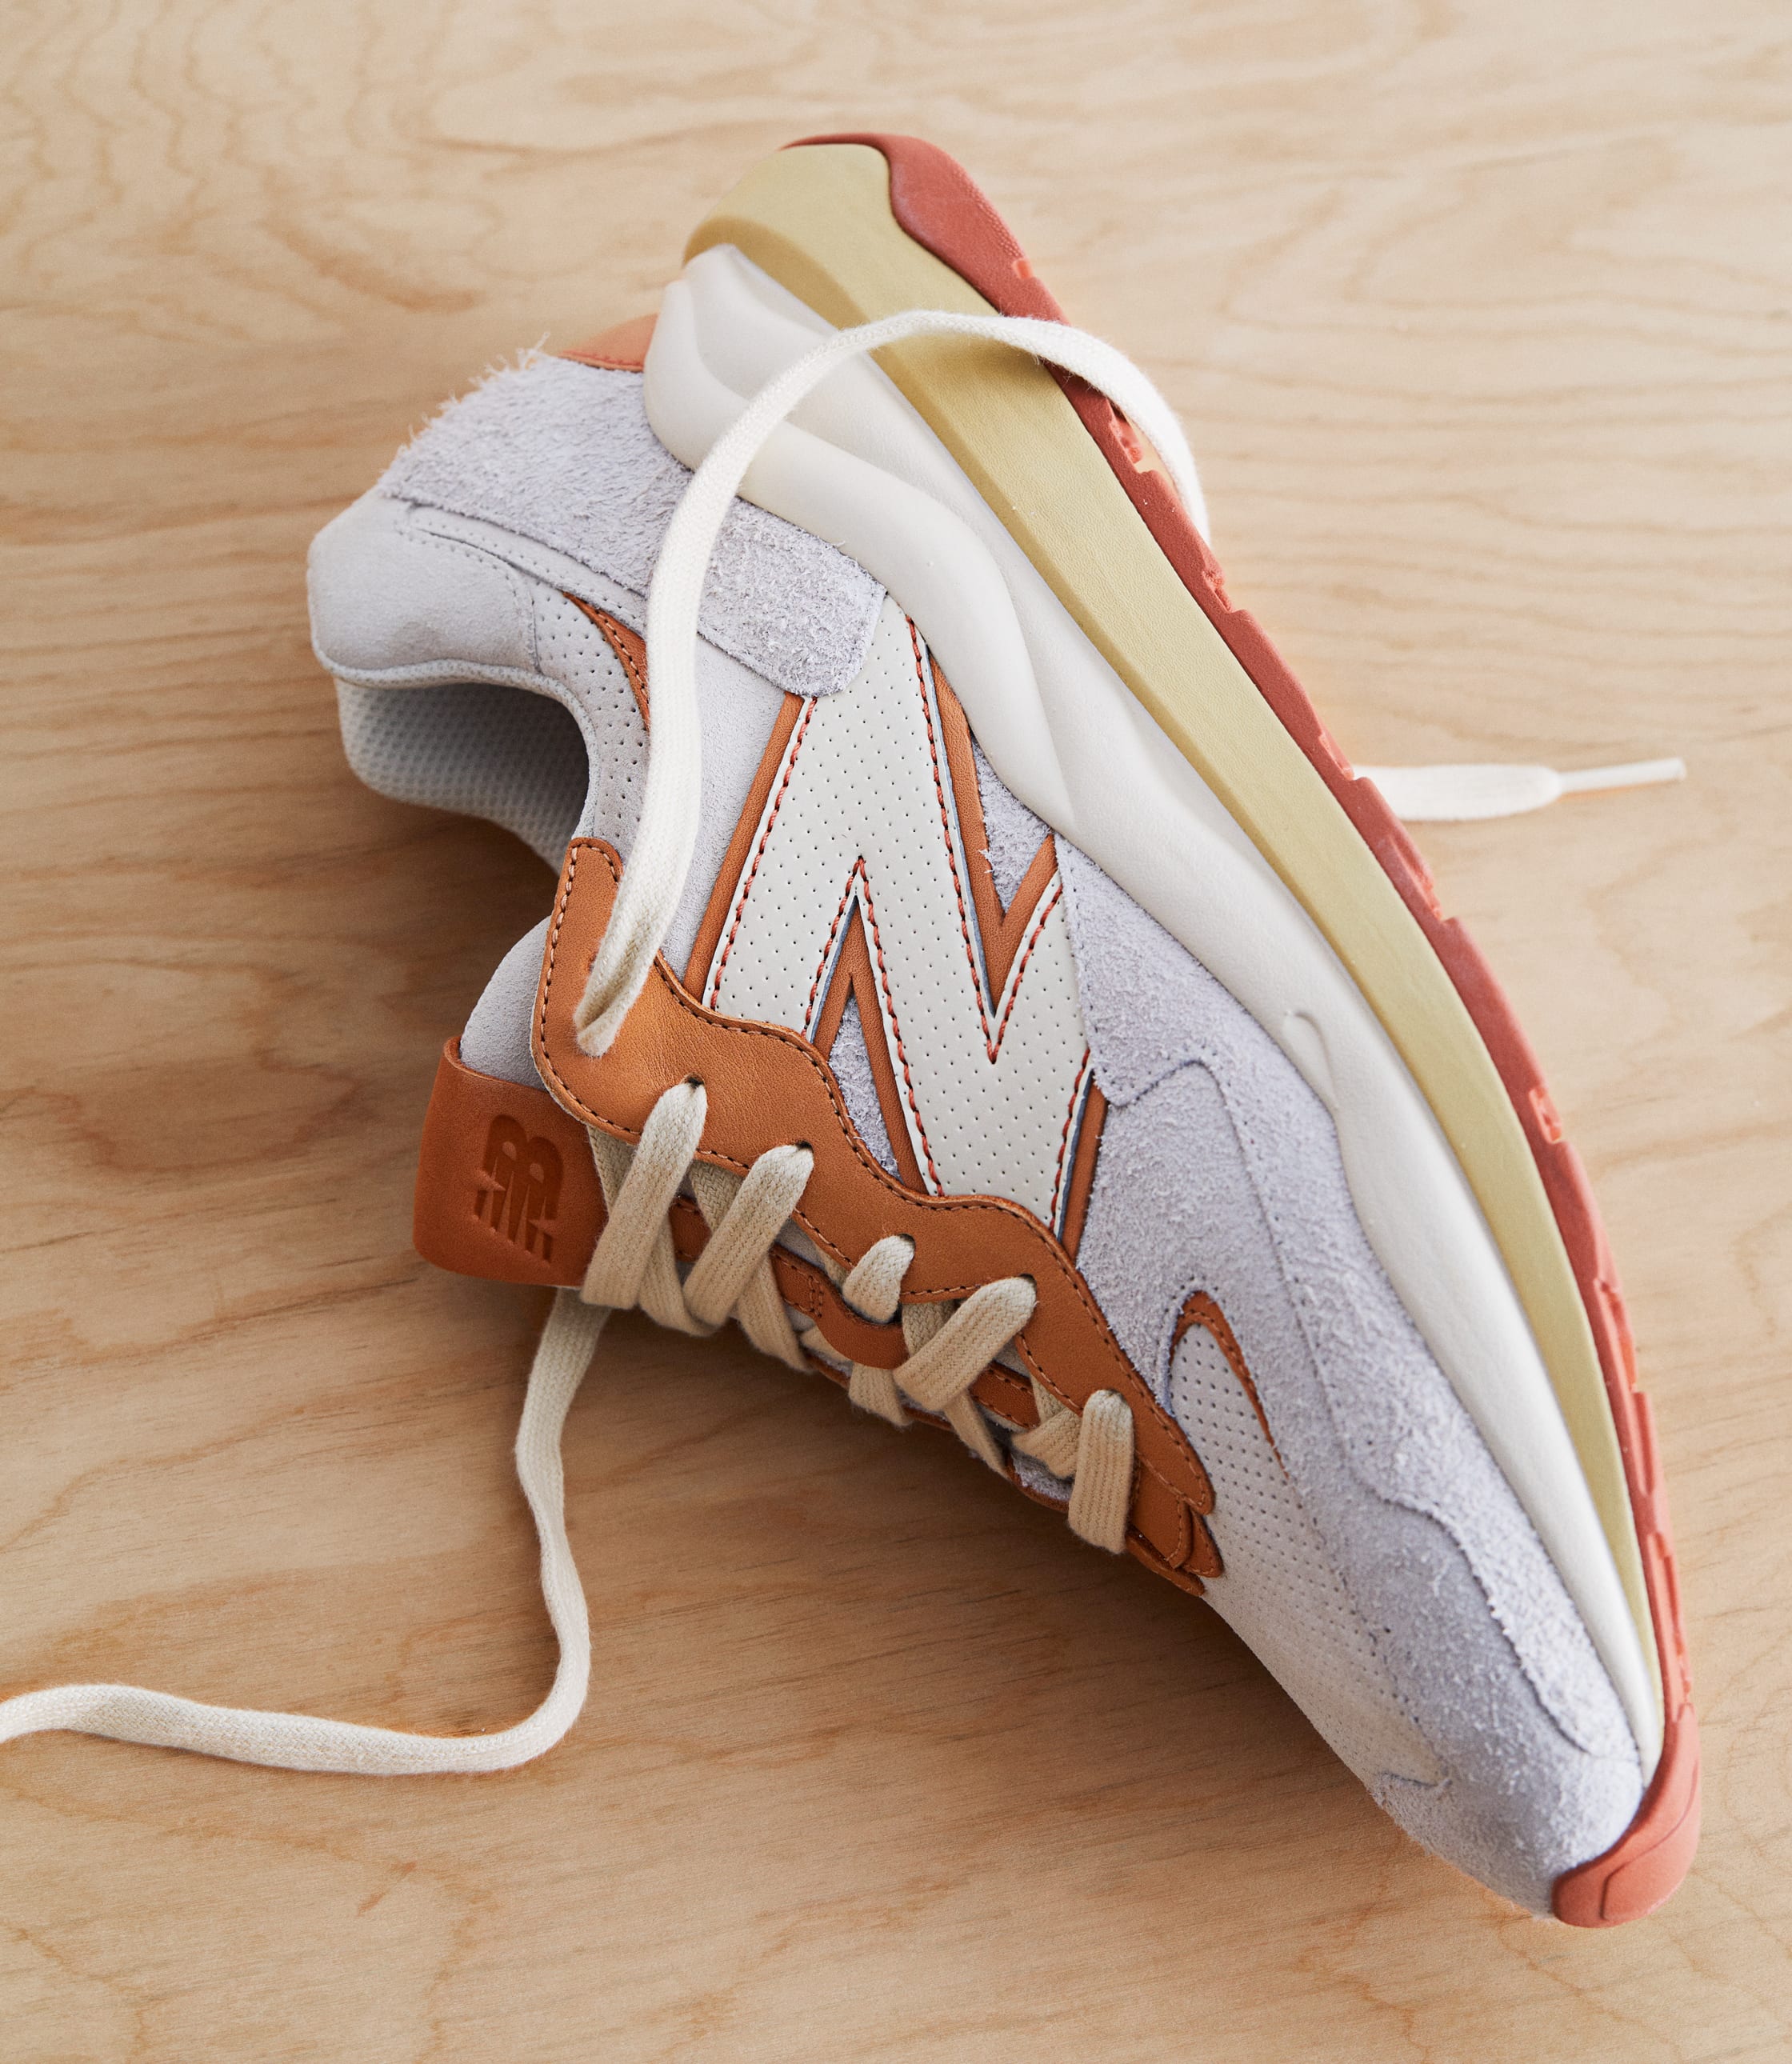 Todd Snyder's Next New Balance Collab Is Very Limited | Complex